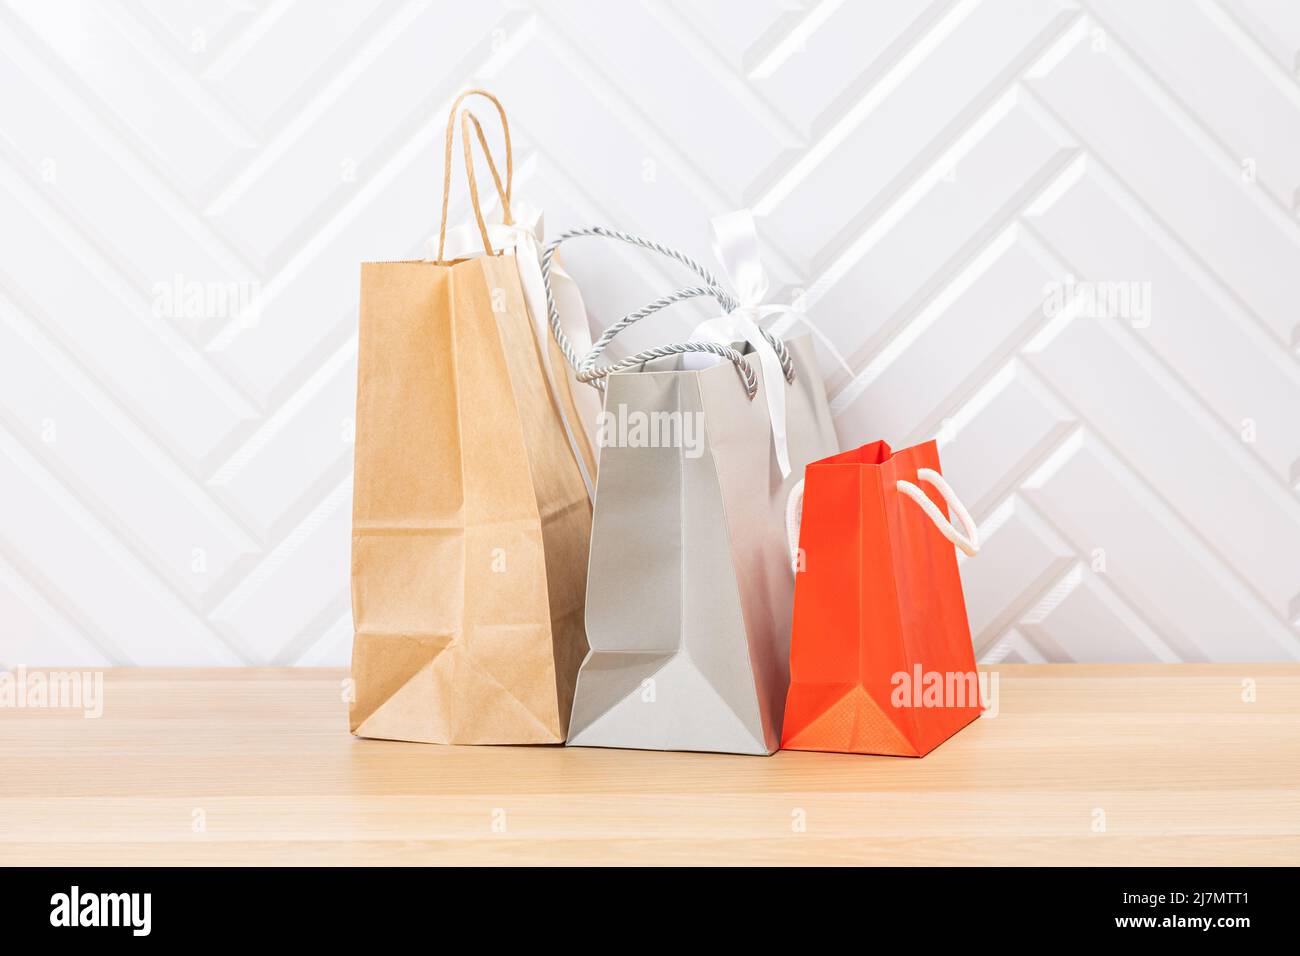 Blank  paper carrier bag with handles for shopping, facing front on right side of a wood veneer table with white wall background providing copy space Stock Photo